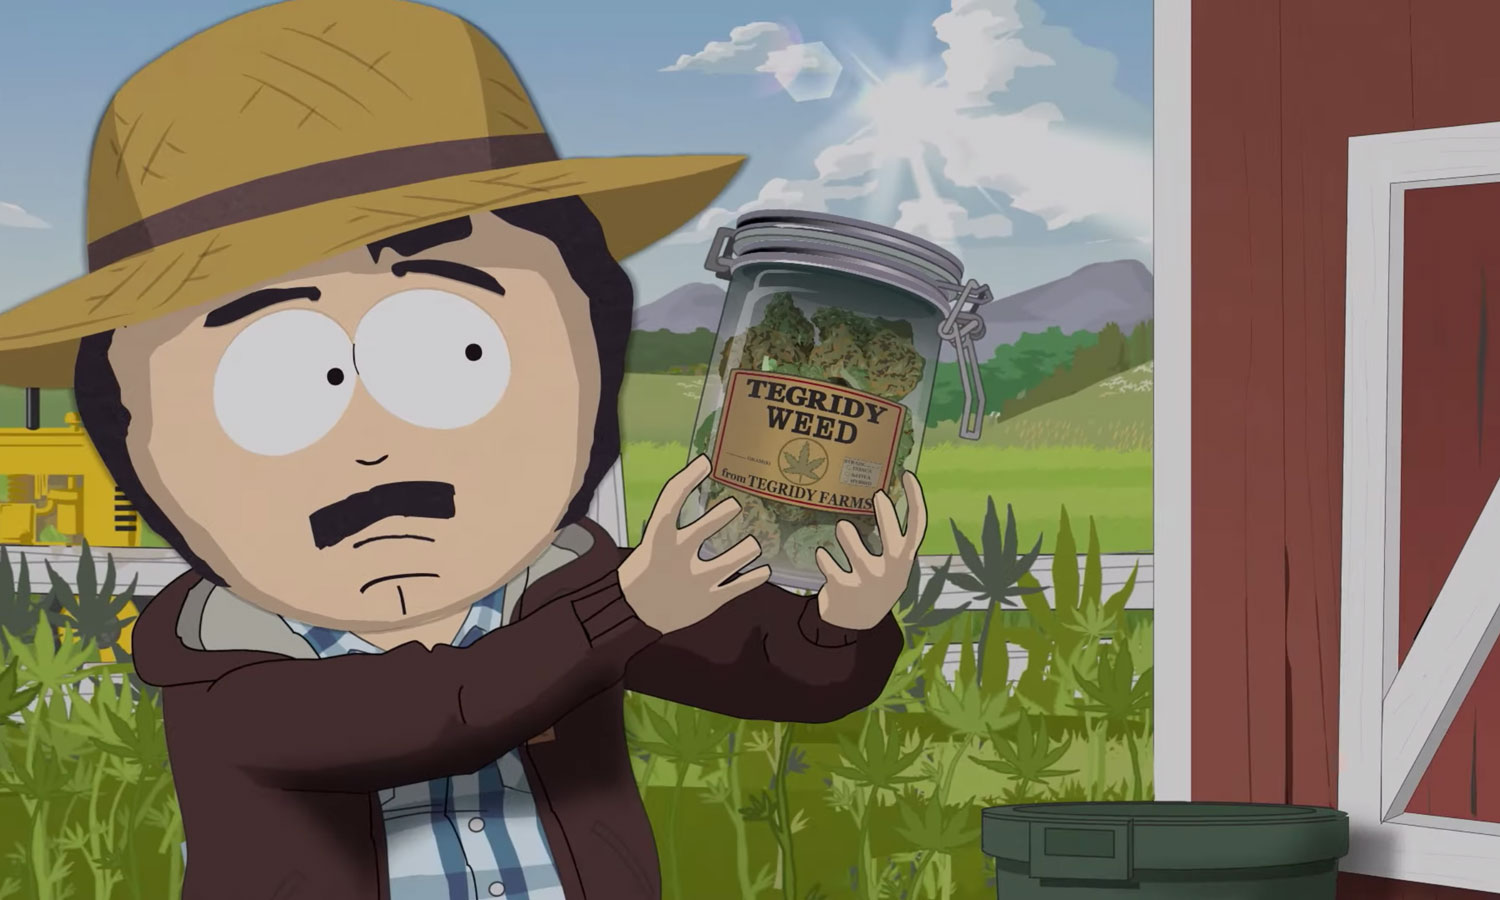 south-park-creators-napalm-corporate-cannabis-and-hint-at-launching-legit-weed-brand.jpg